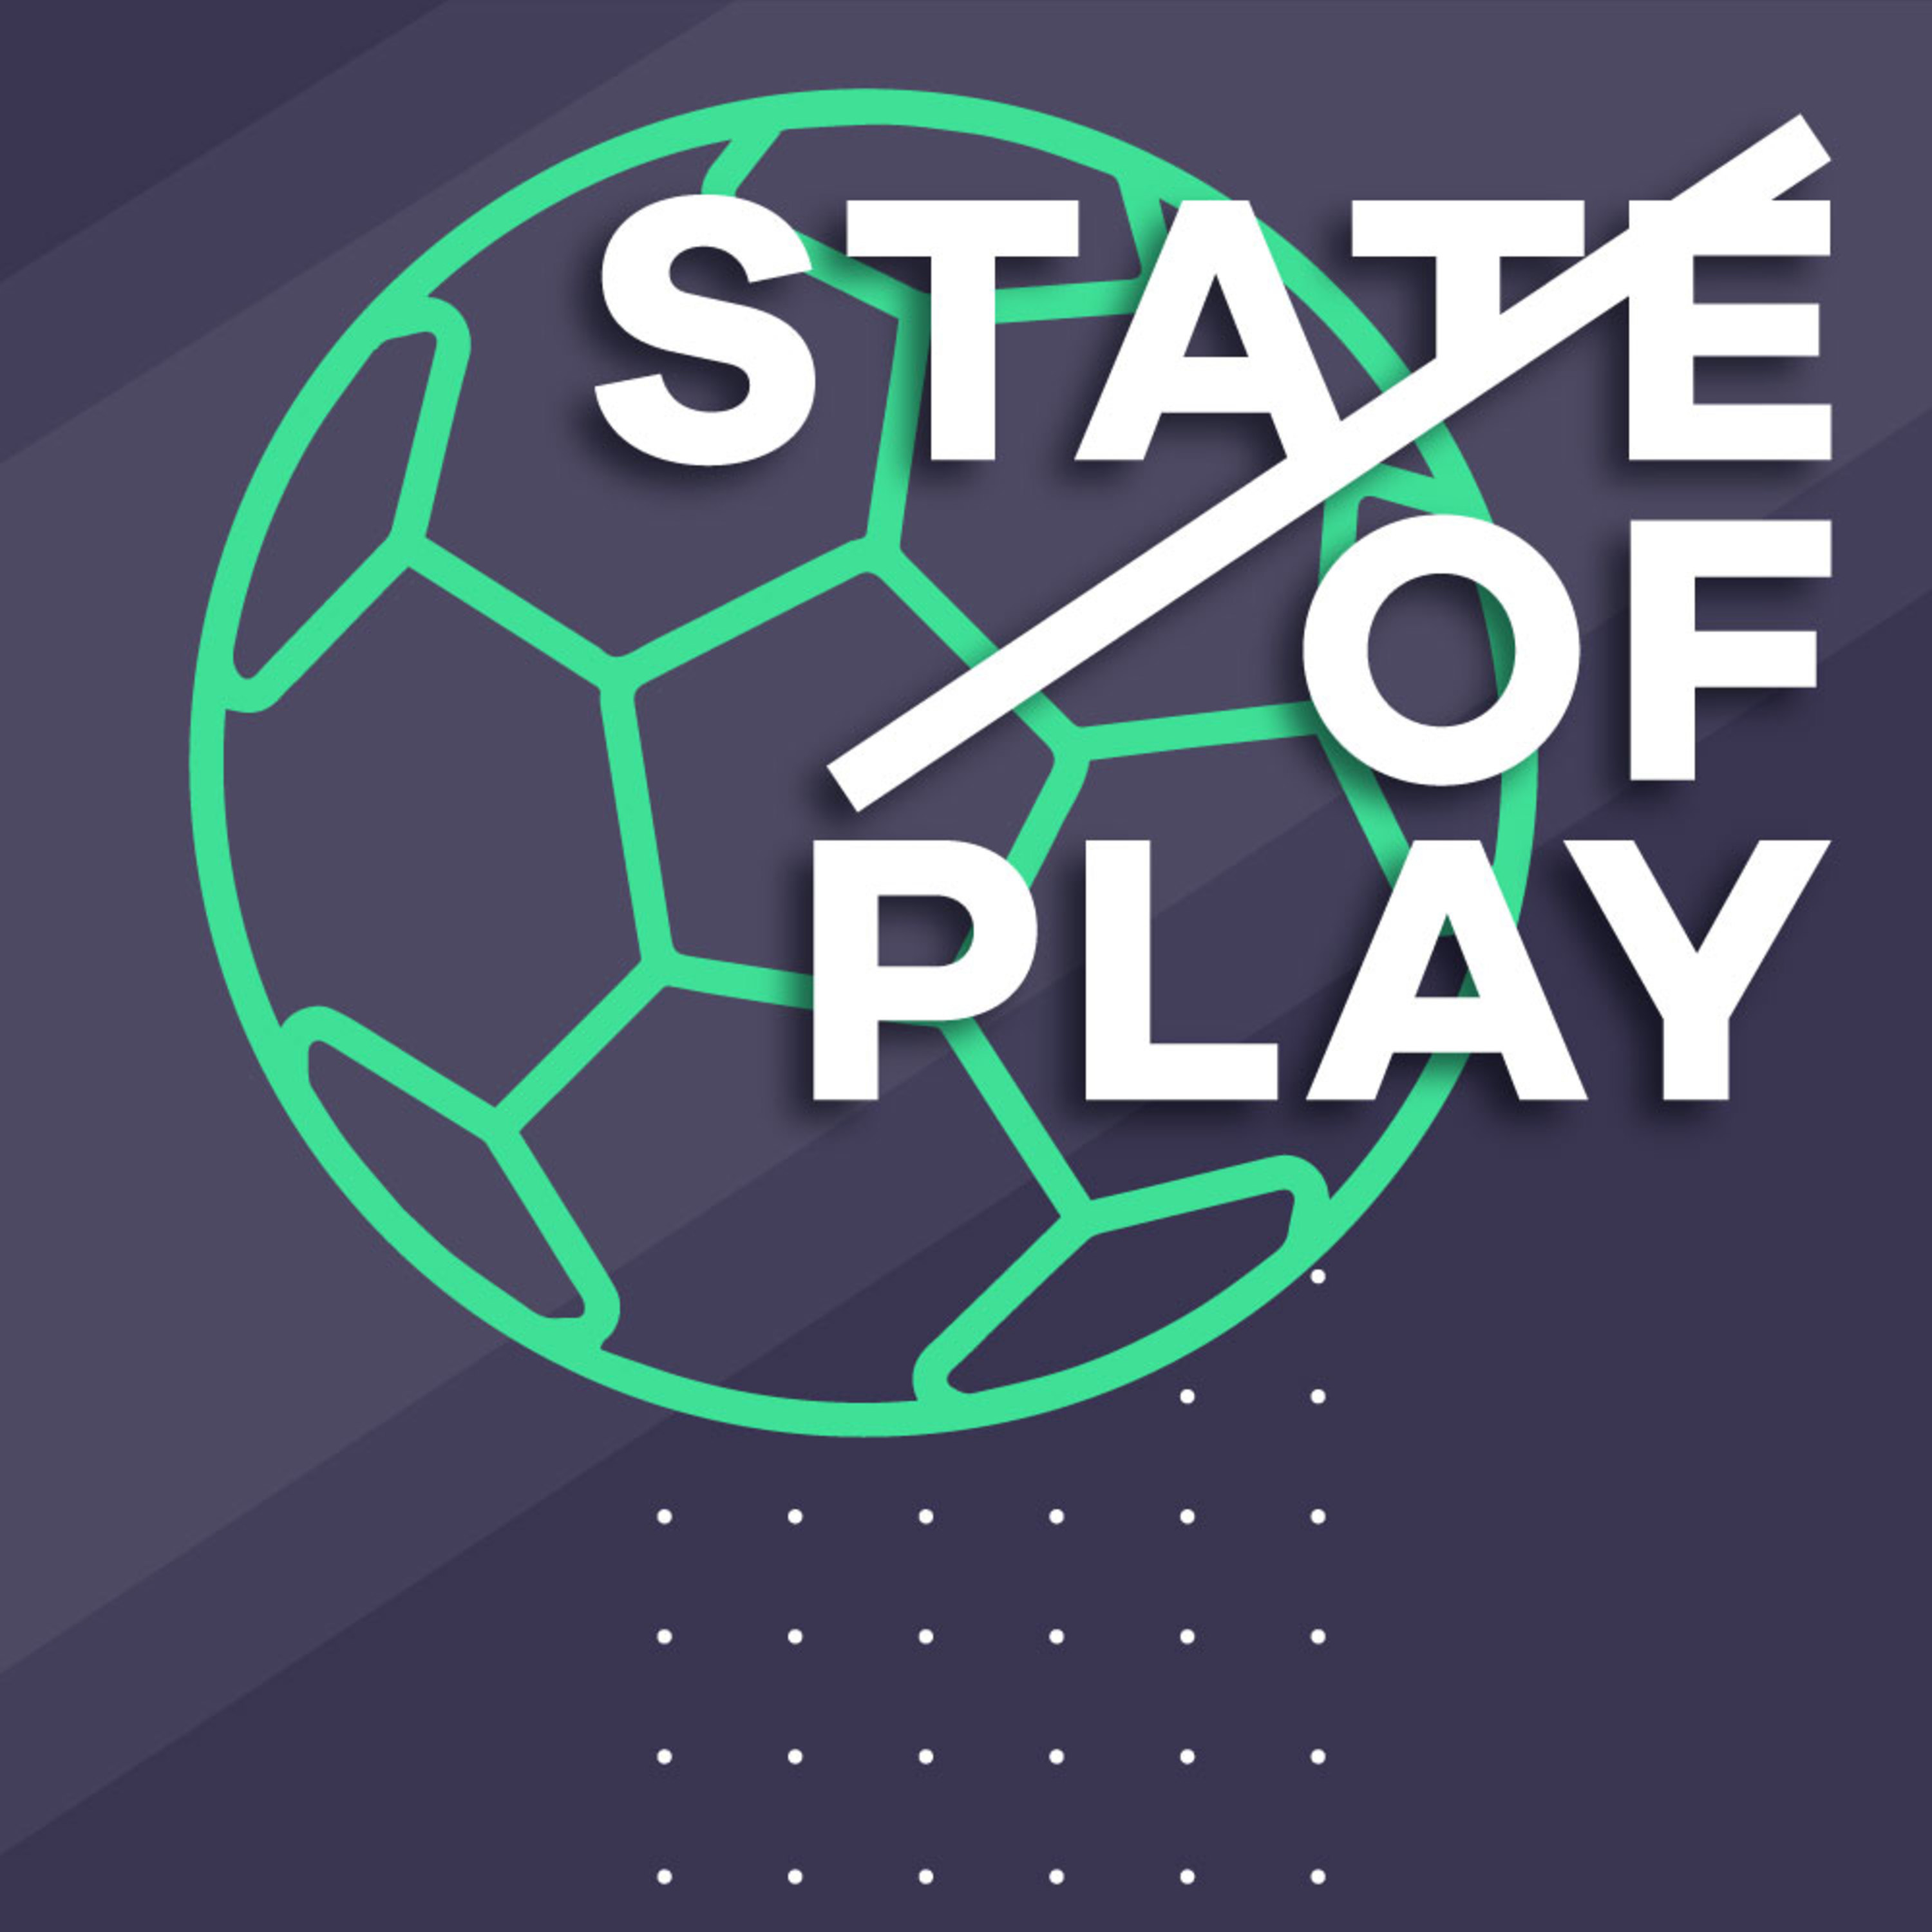 State of Play, review